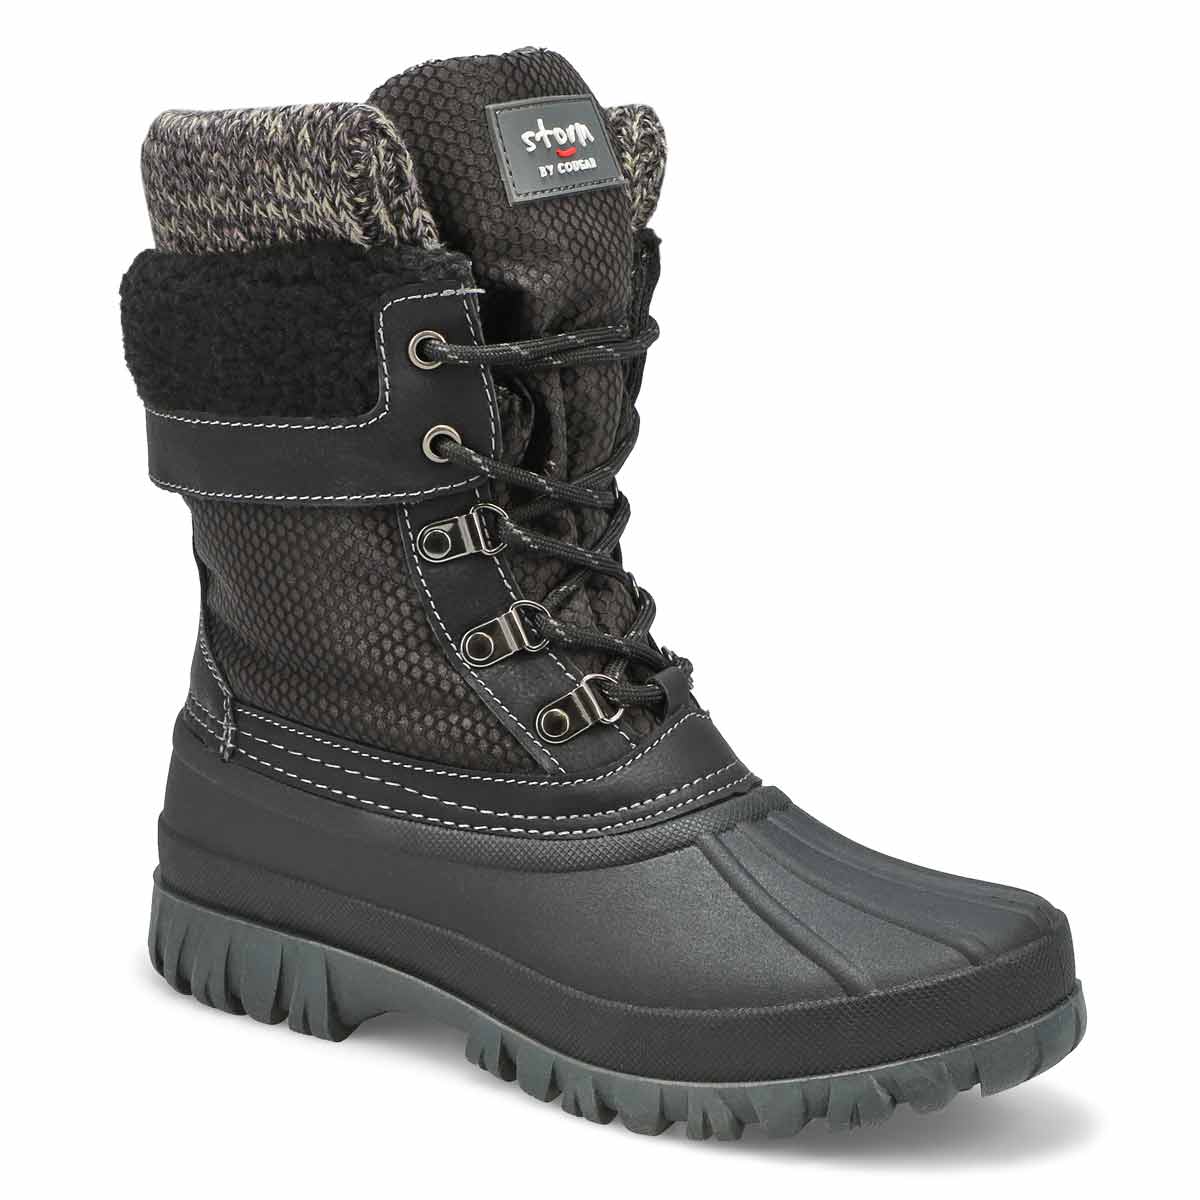 storm by cougar creek boots